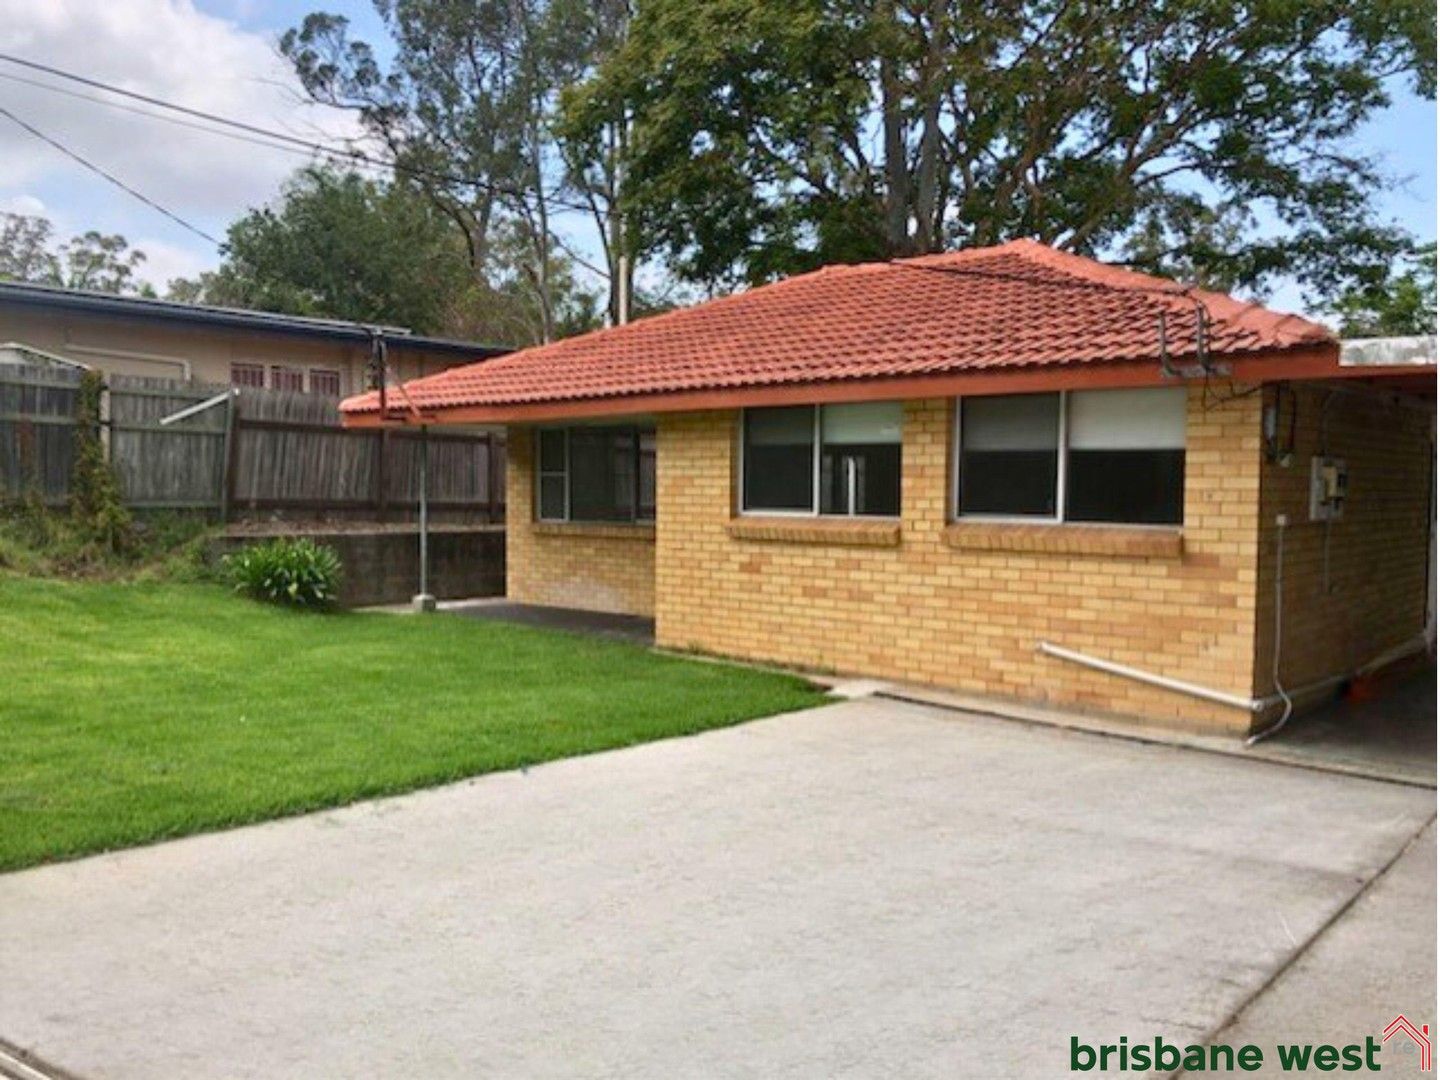 3 bedrooms House in 46 Brookfield Road KENMORE QLD, 4069